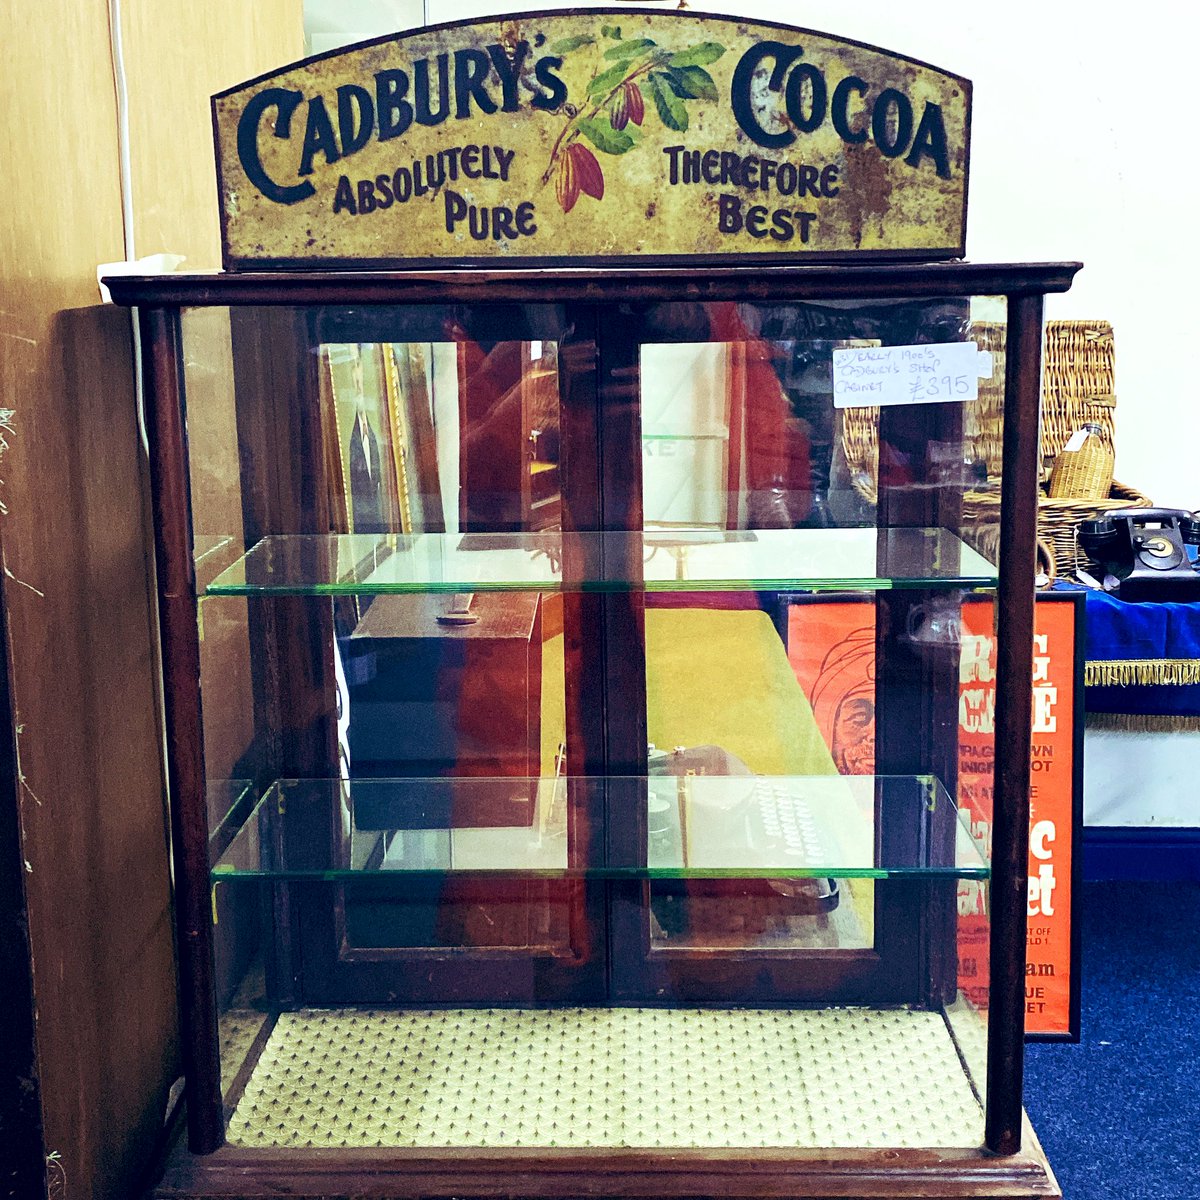 A new dealer is unpacking this morning with some gems like this early 1900’s Cadbury’s shop cabinet. #cadburyscabinet #cadburys #cadburyschocolate #shopdisplay #oldshop #counterdisplay #newdealer #astraantiquescentre #hemswell #lincolnshire